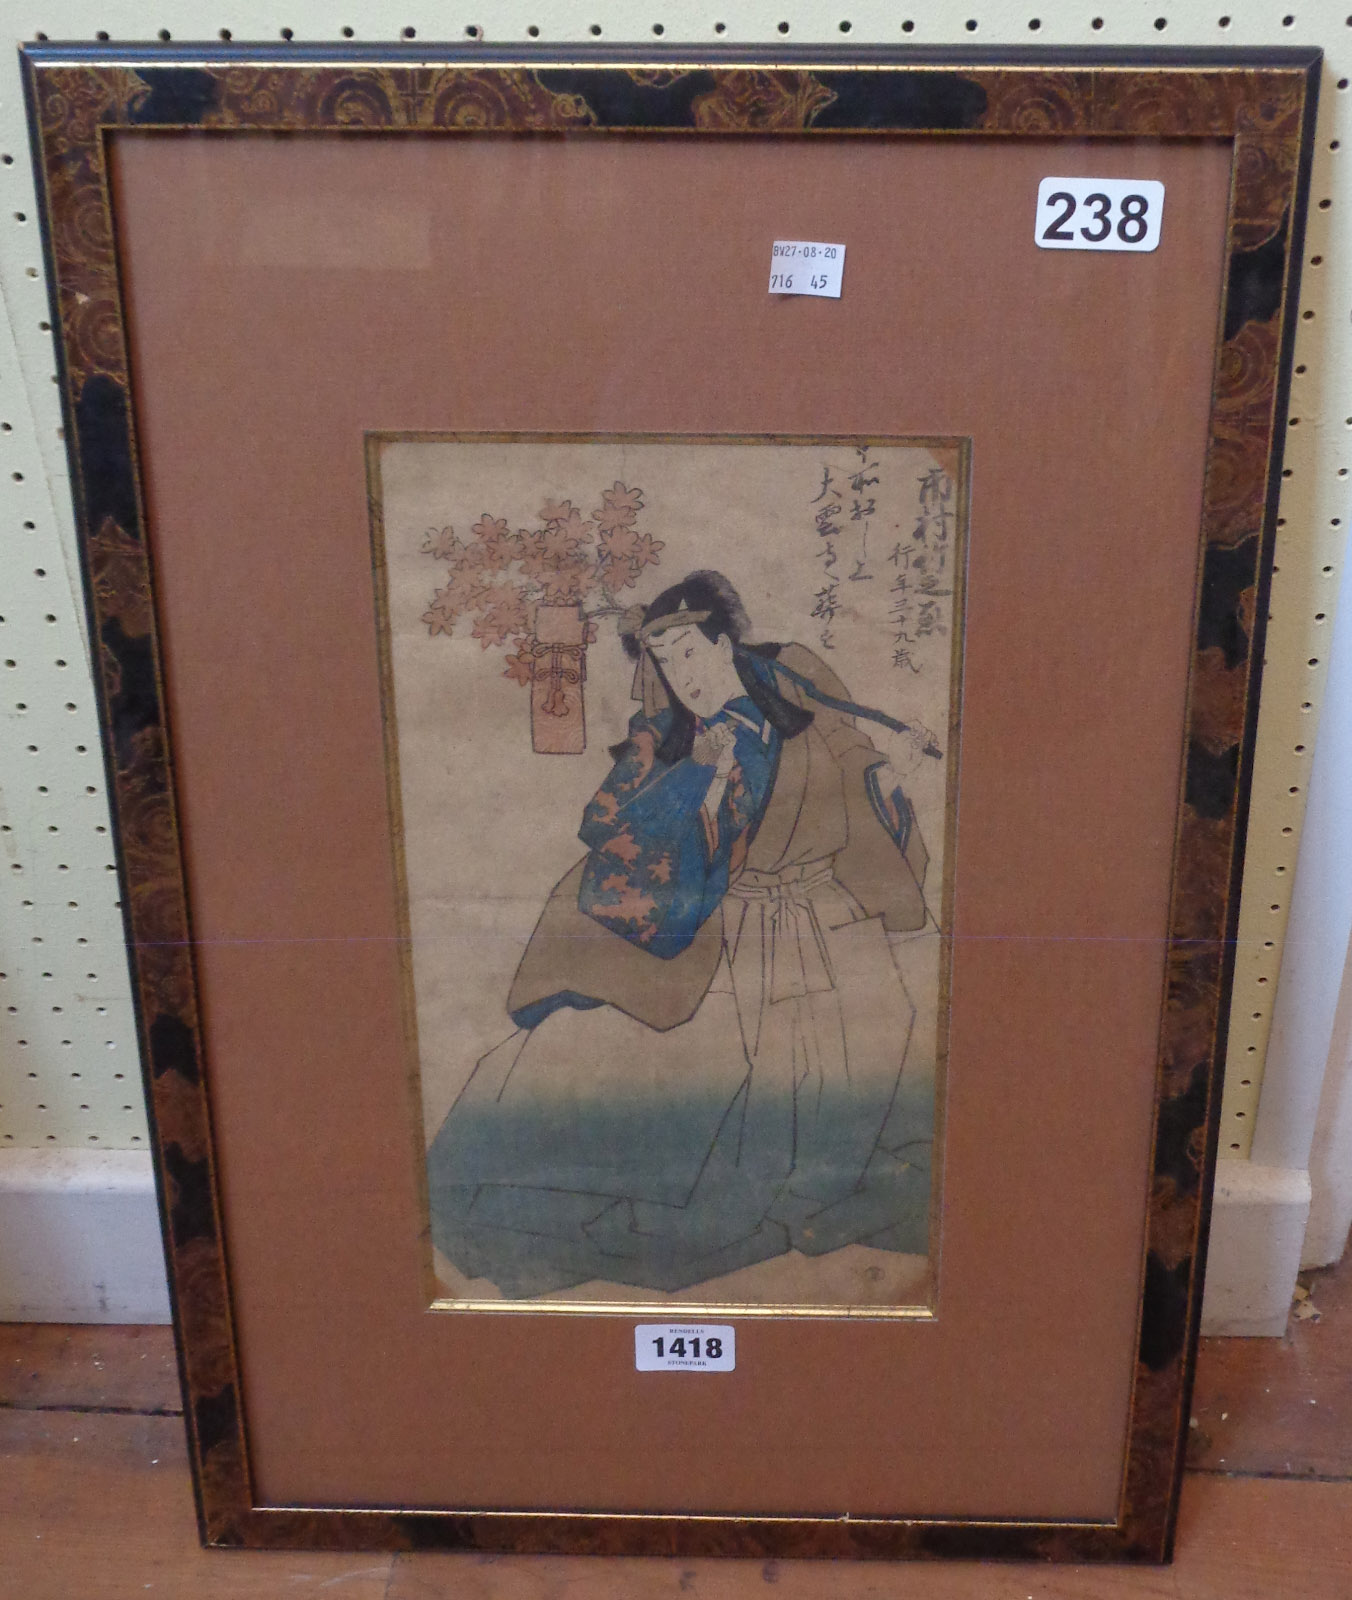 A lacquered framed Japanese wood block print, depicting a figure carrying a flowering branch with